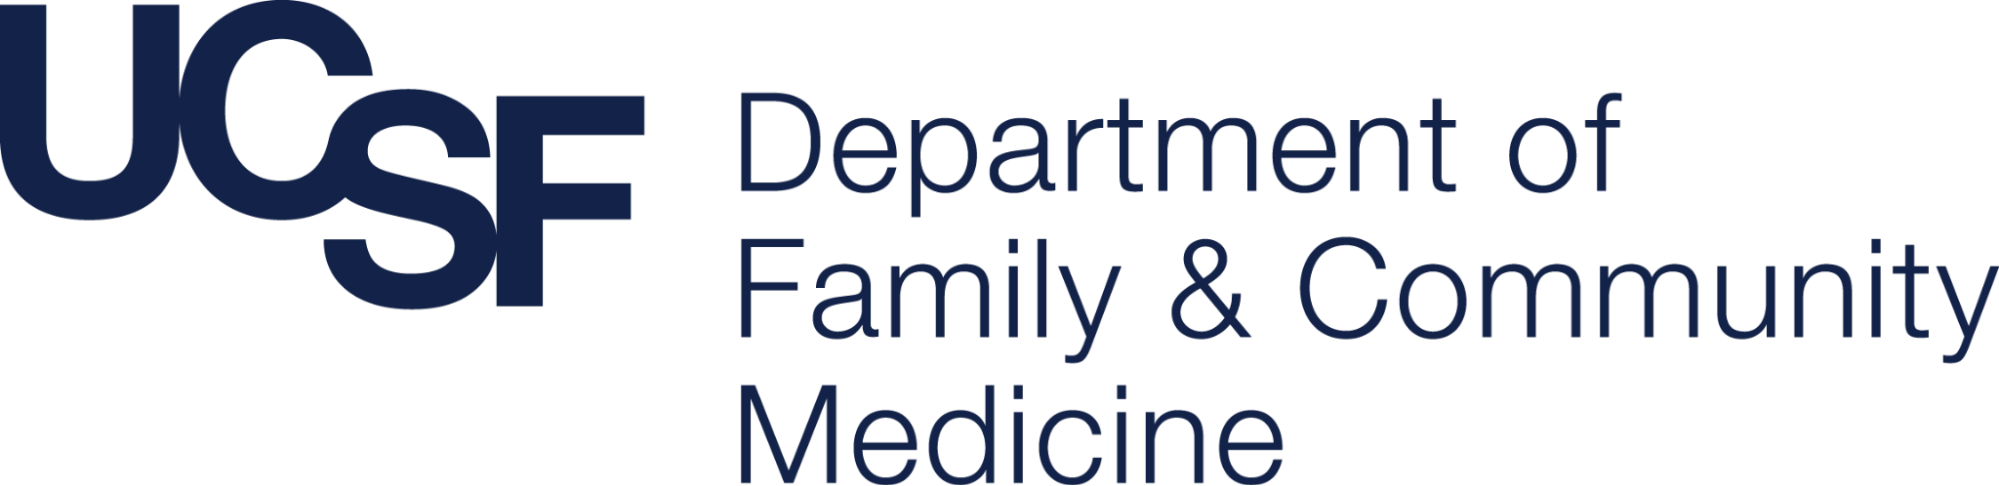 UCSF Department of Family & Community Medicine